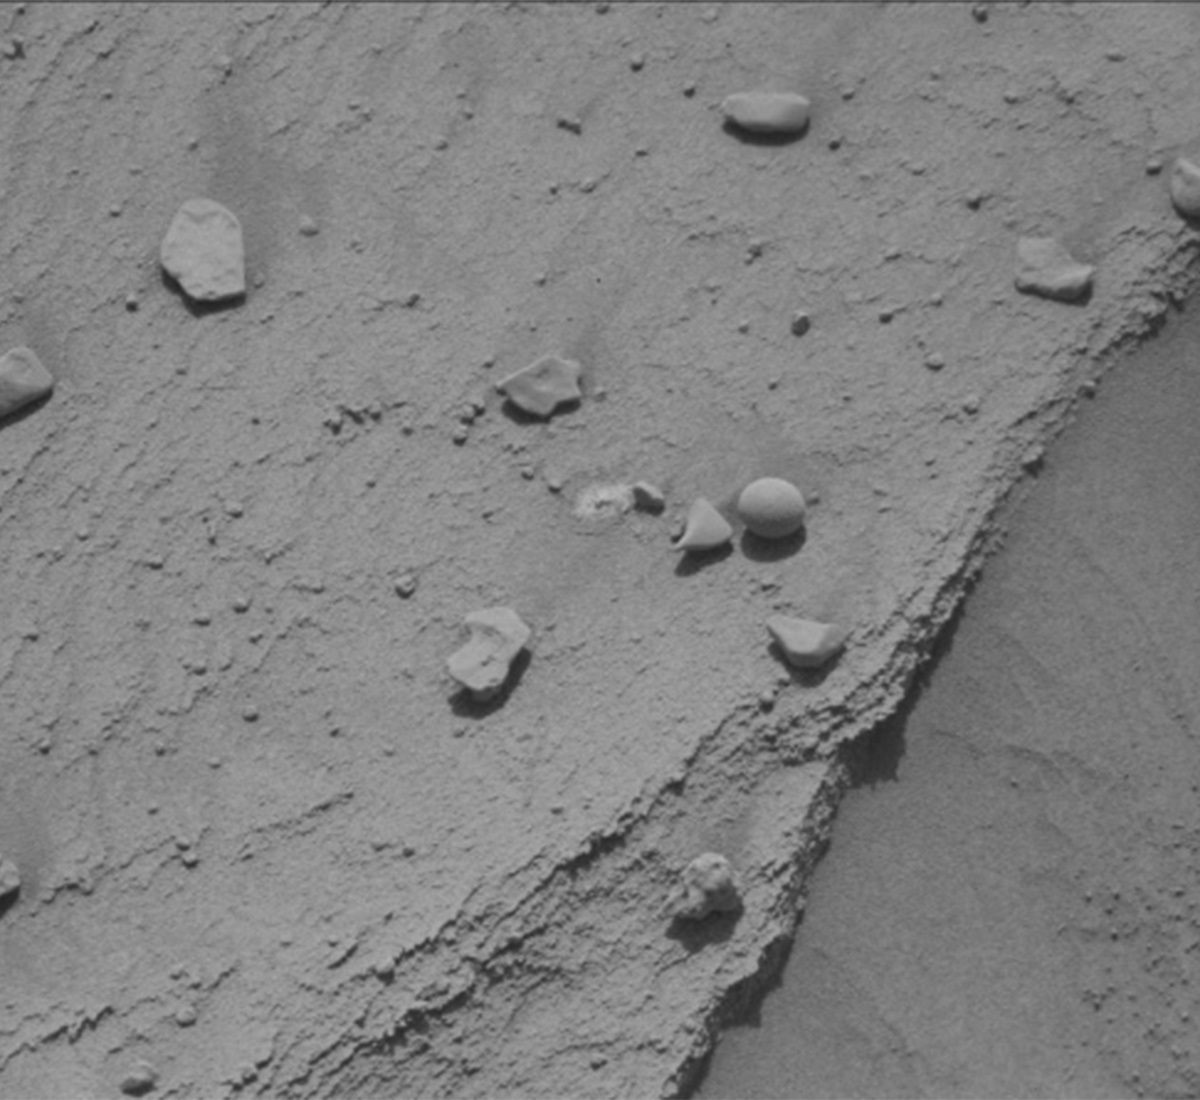 This image of Martian pebbles was taken by Curiosity's Mast Camera on Sol 3786.